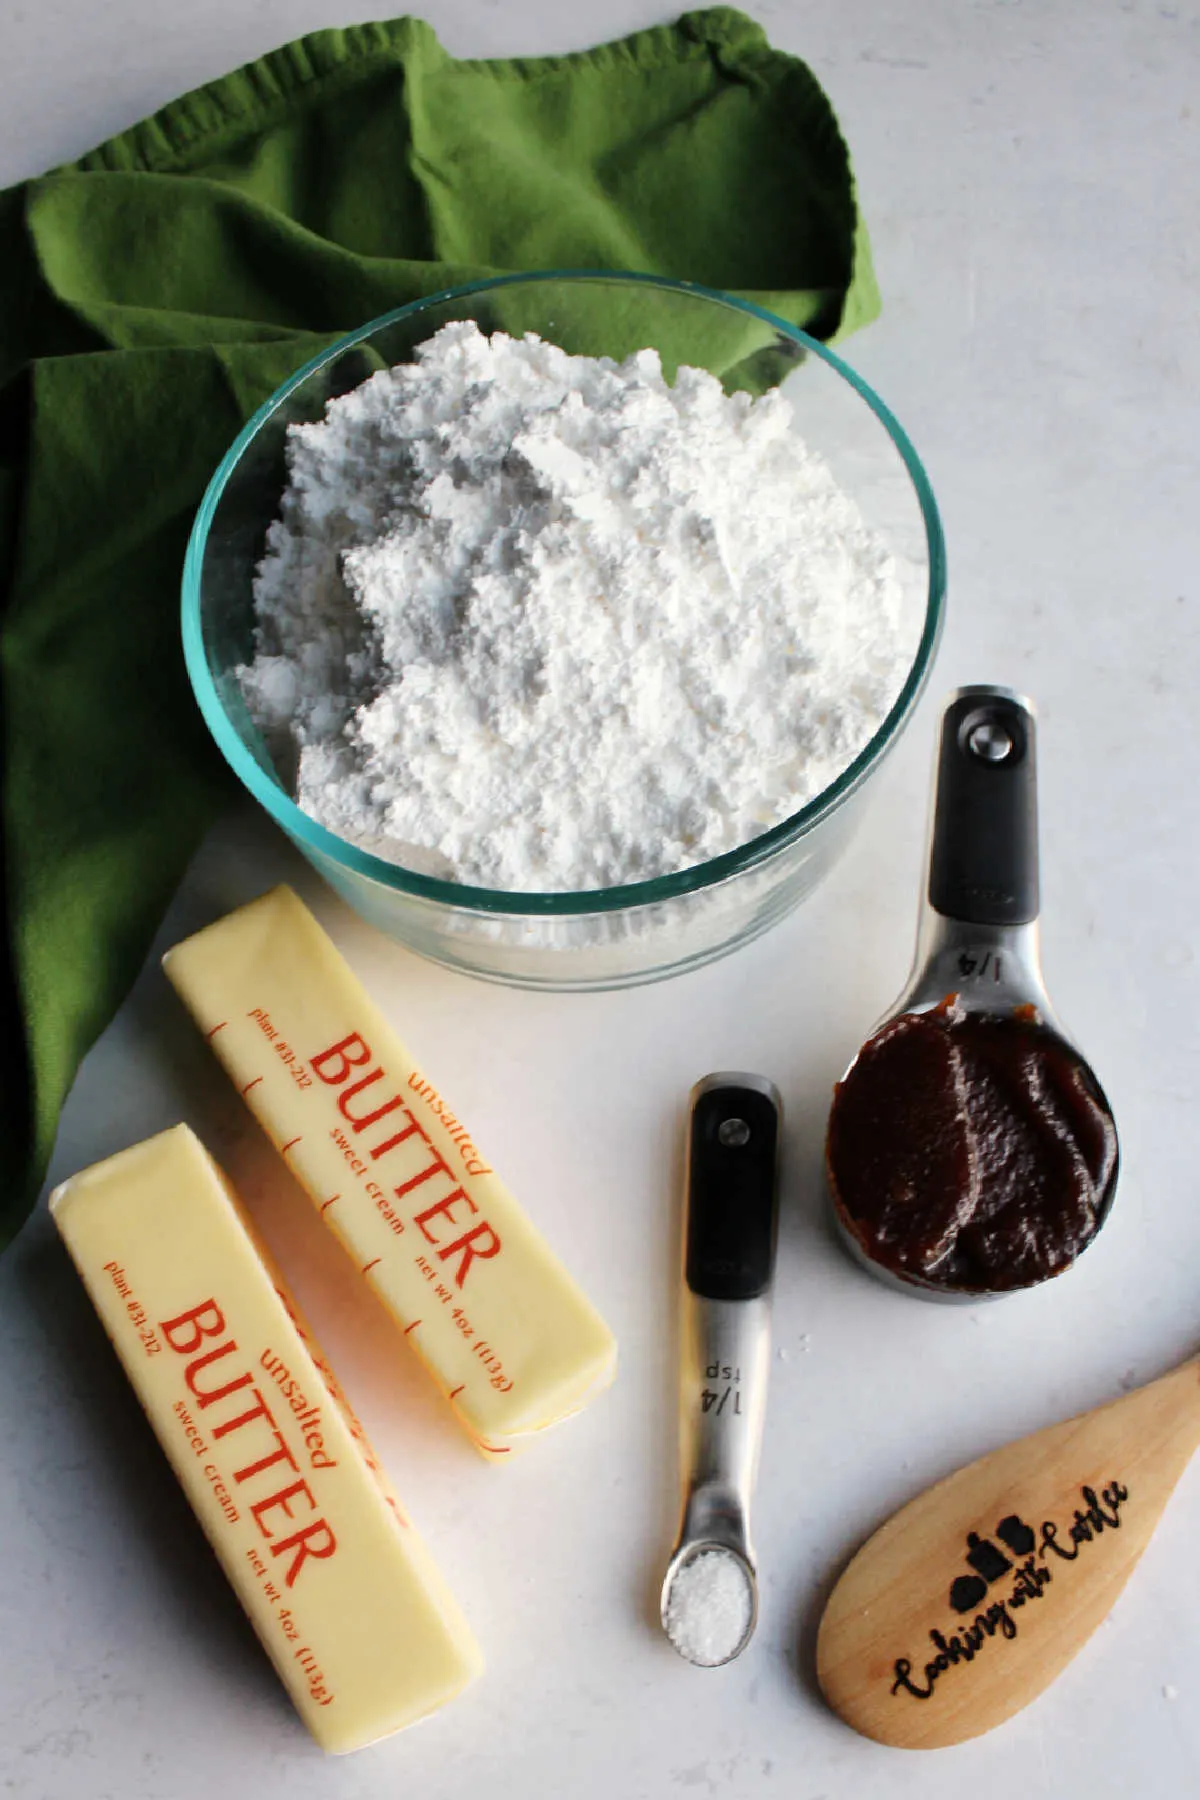 Ingredients: butter, salt, apple butter and powdered sugar ready to be made into frosting.